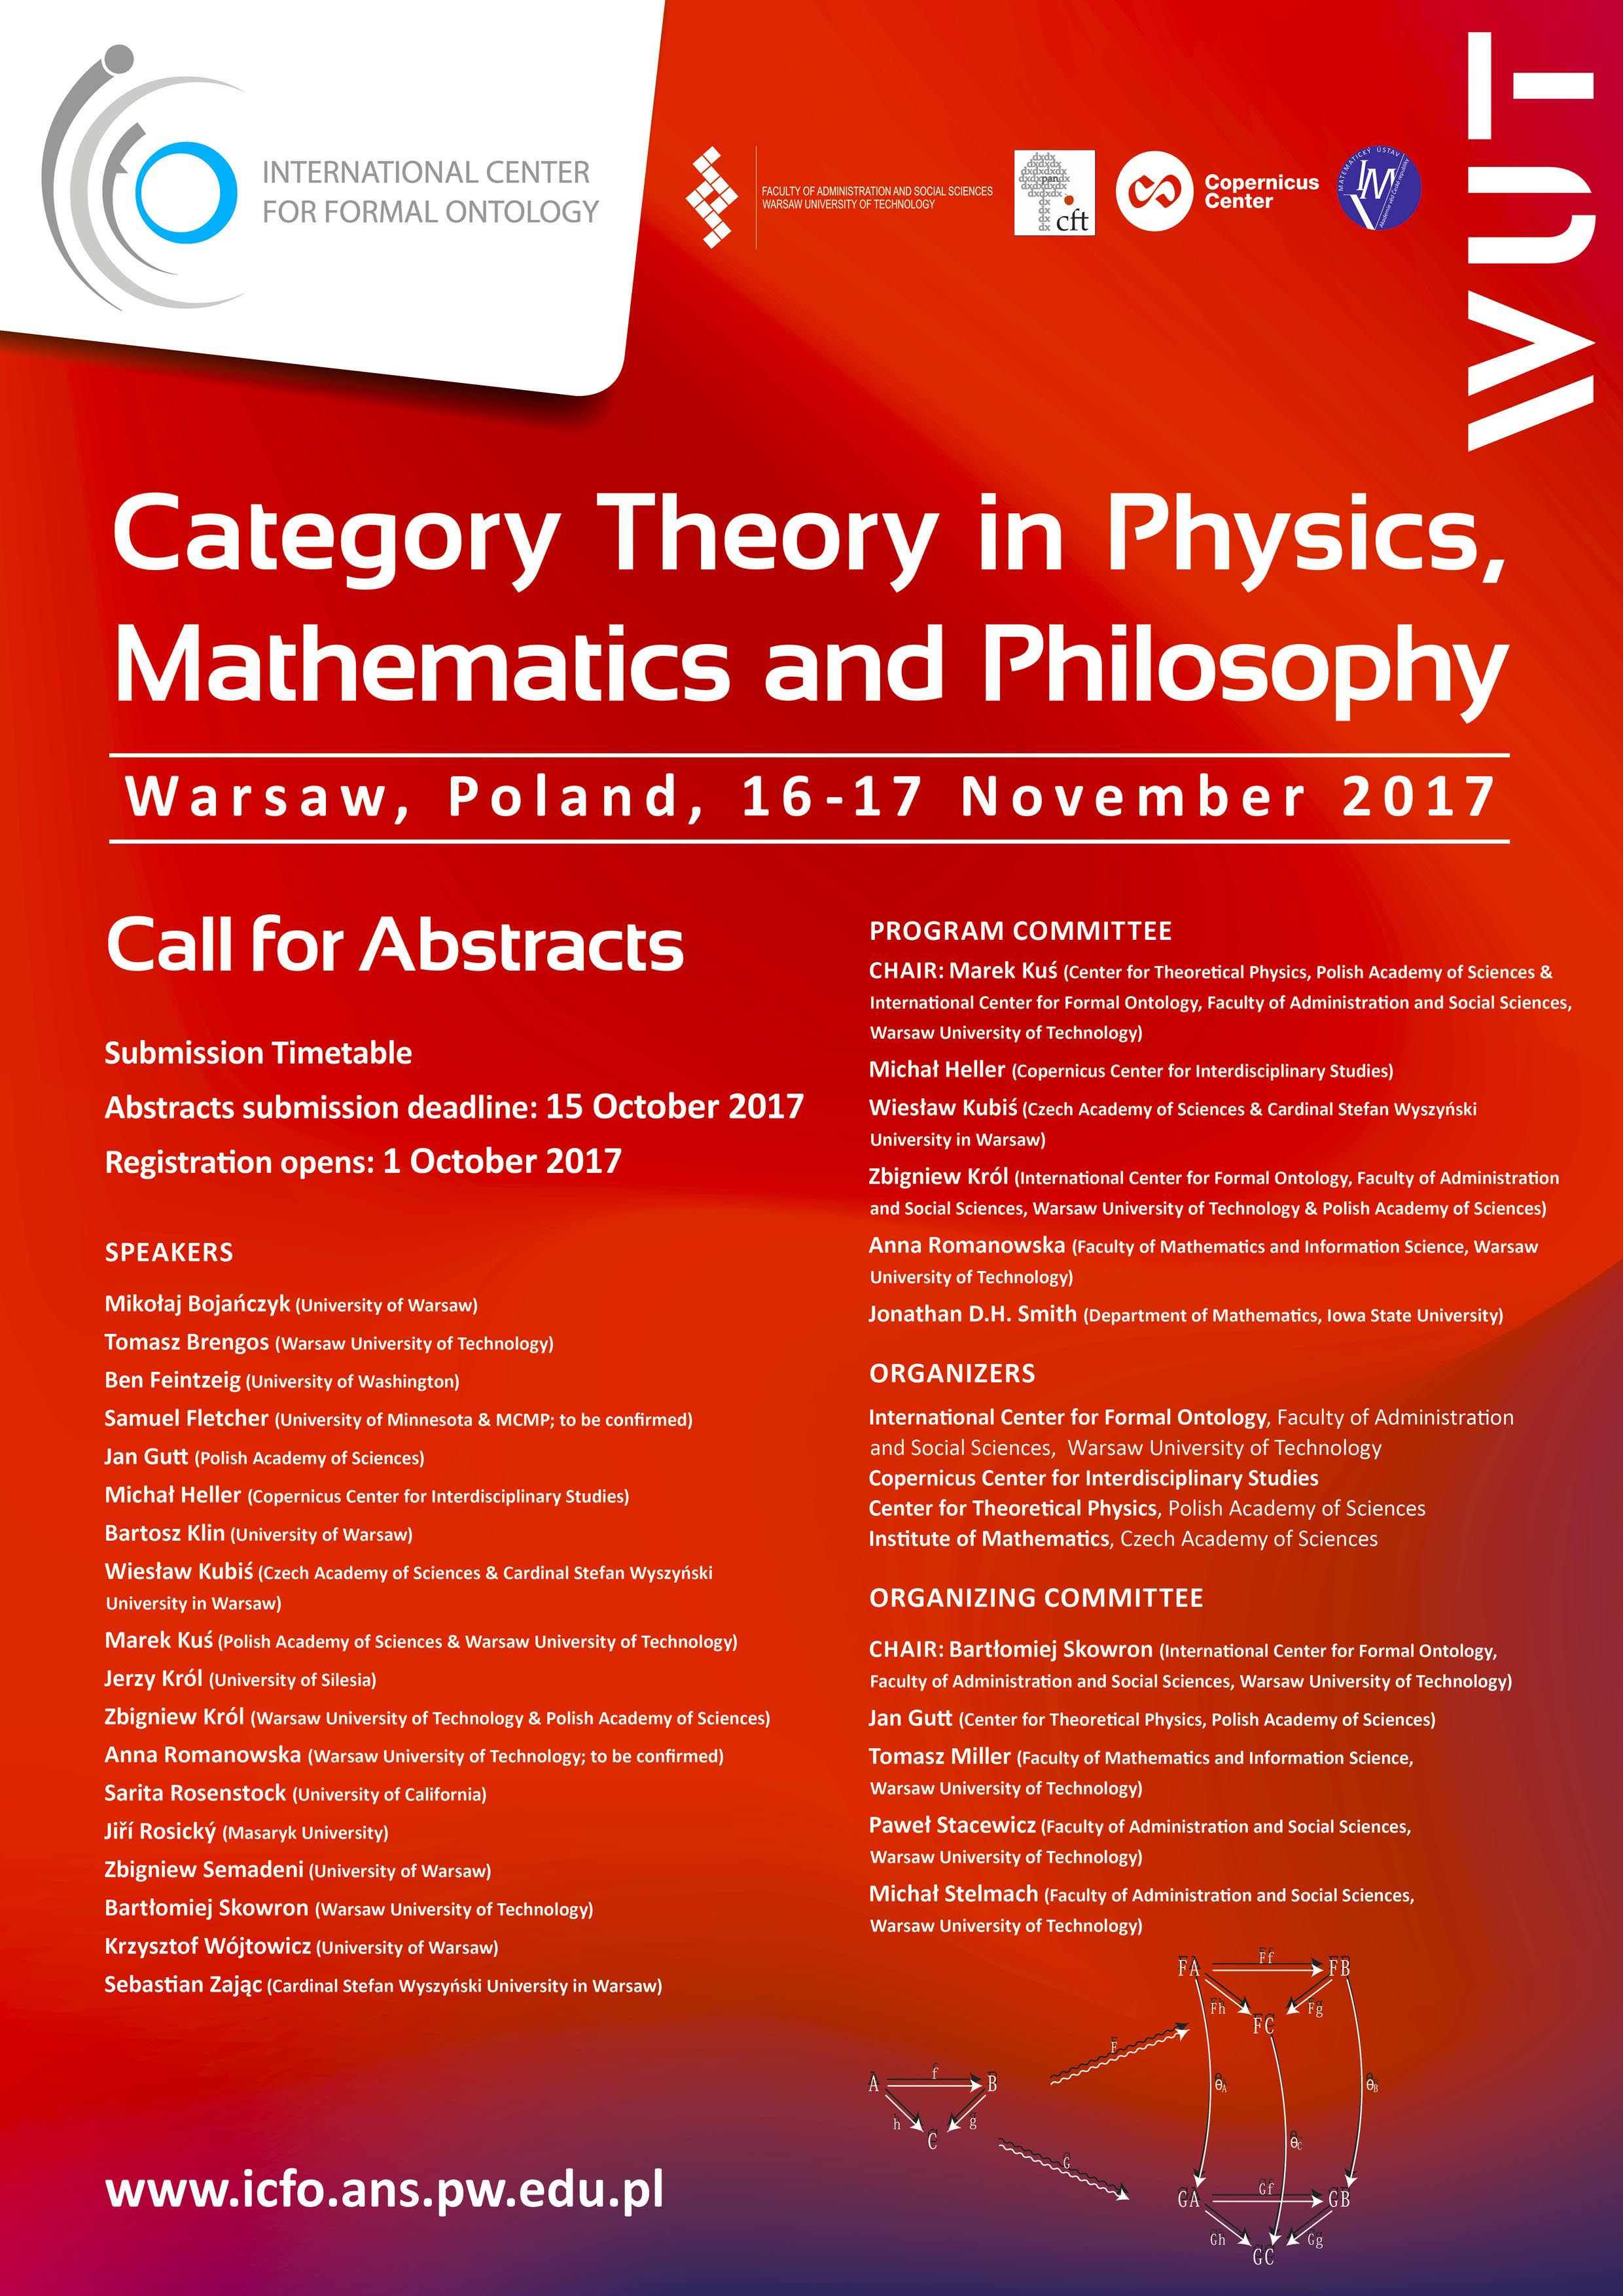 Category Theory in Physics, Mathematics and Philosophy